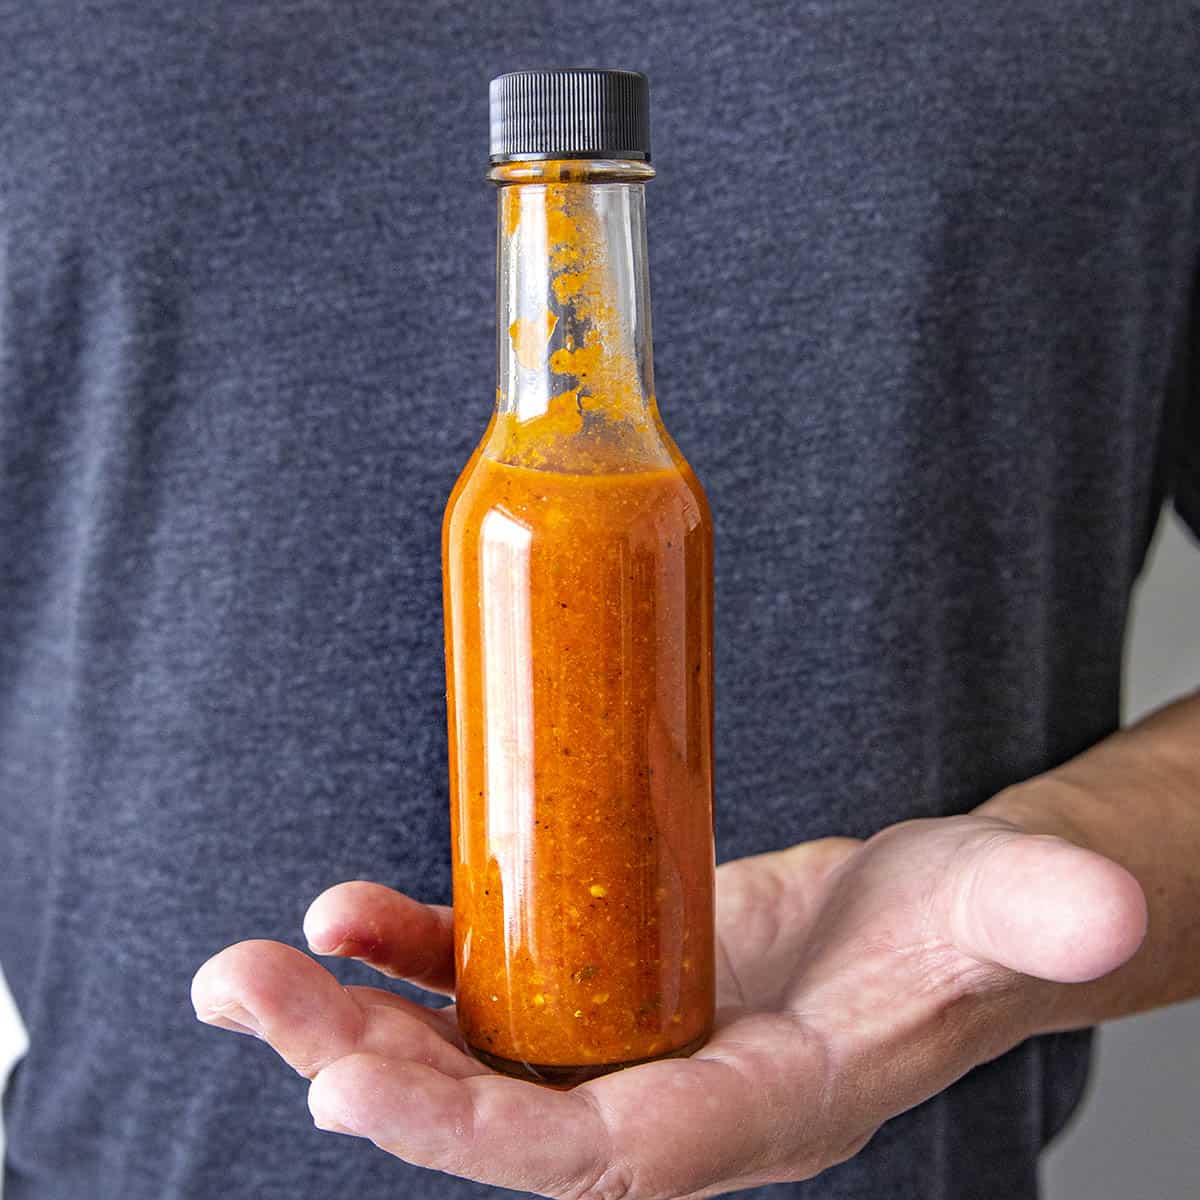 Just bought the Hot sauce challenge, it was fairly cheap so I took